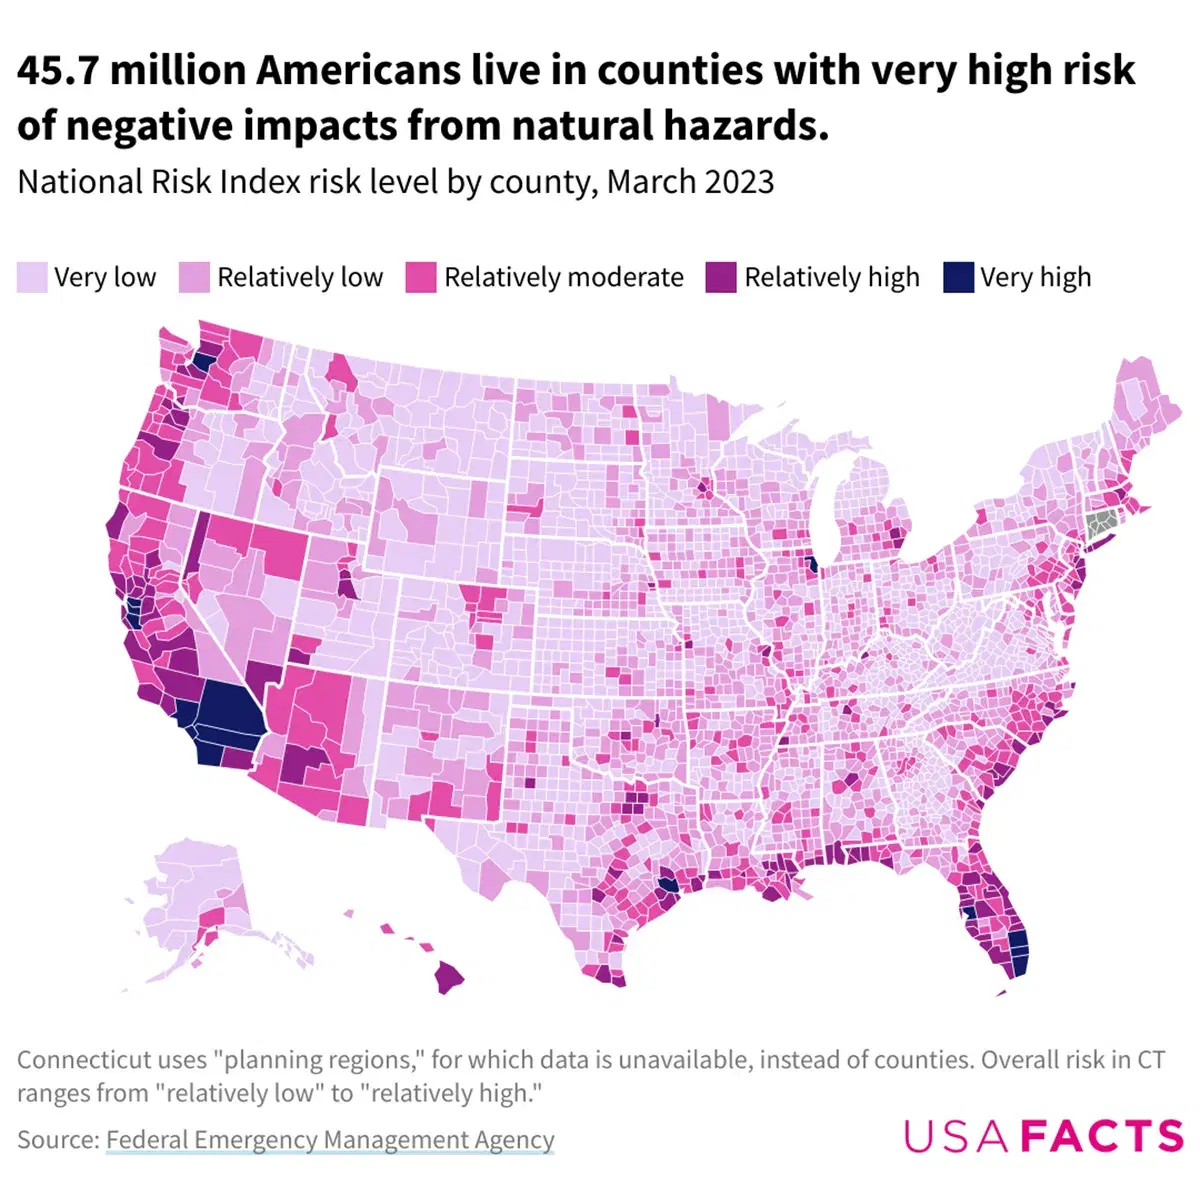 Where are Properties Most at Risk of Natural Disasters in the US?